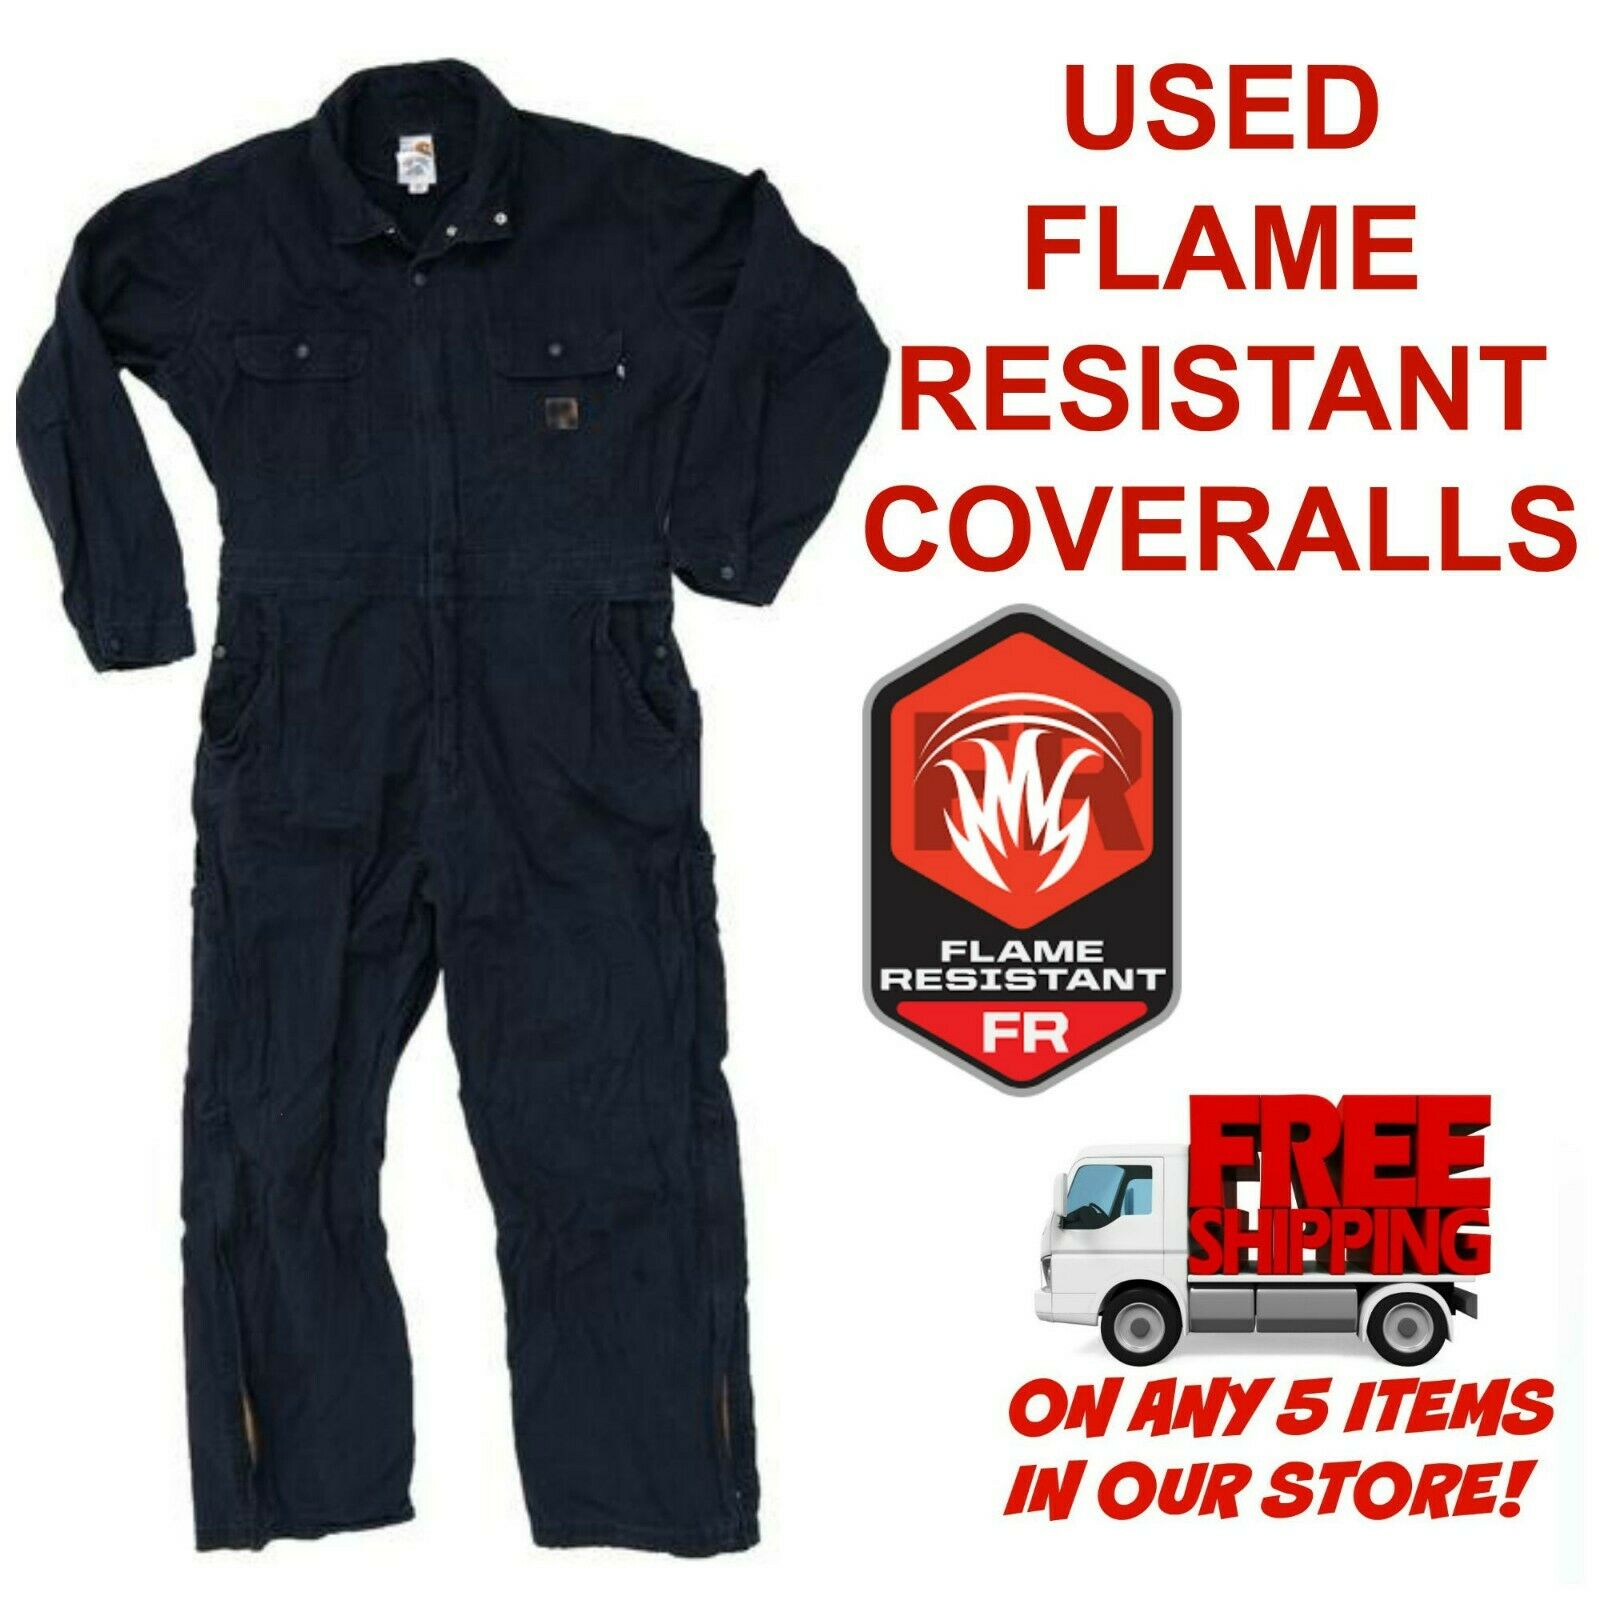 Flame Resistant Fr Used Coveralls Cintas Redkap Unifirst G&k